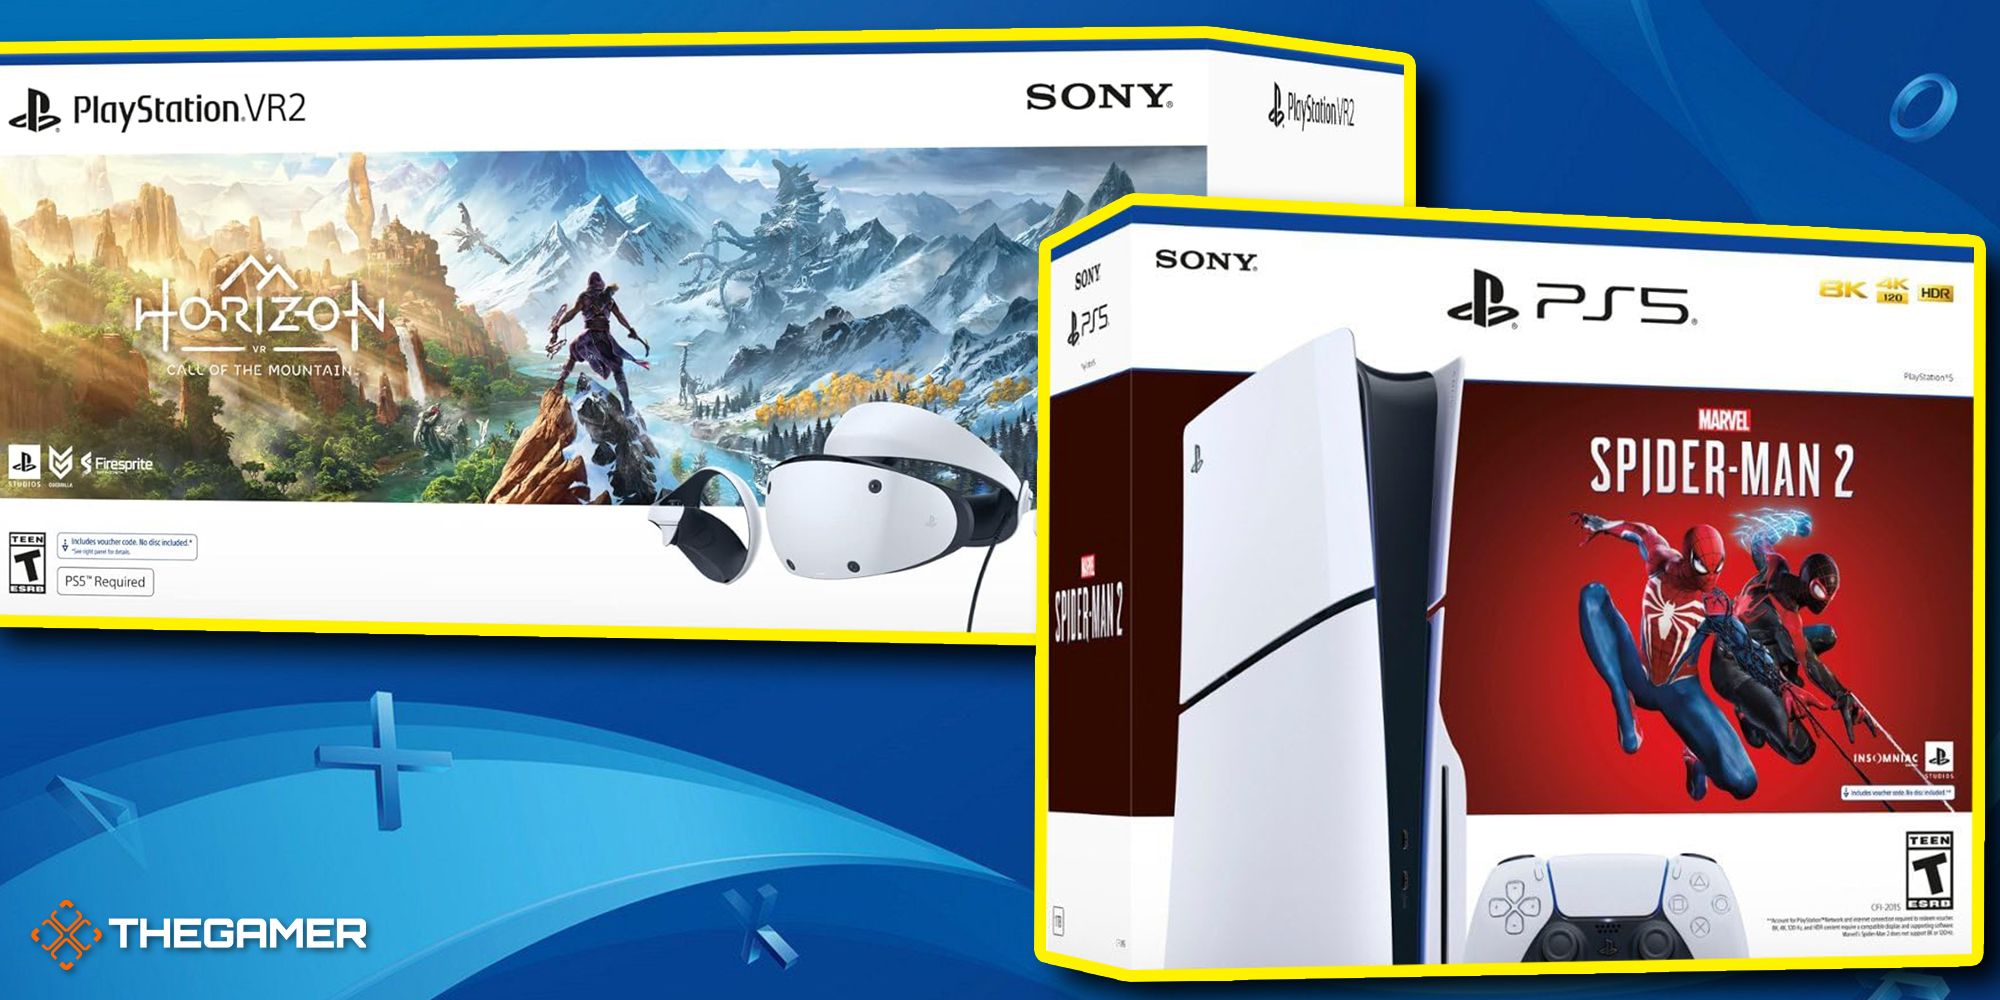 ps vr2 horizon call of the mountain bundle, and a spider-man 2 ps5 bundle